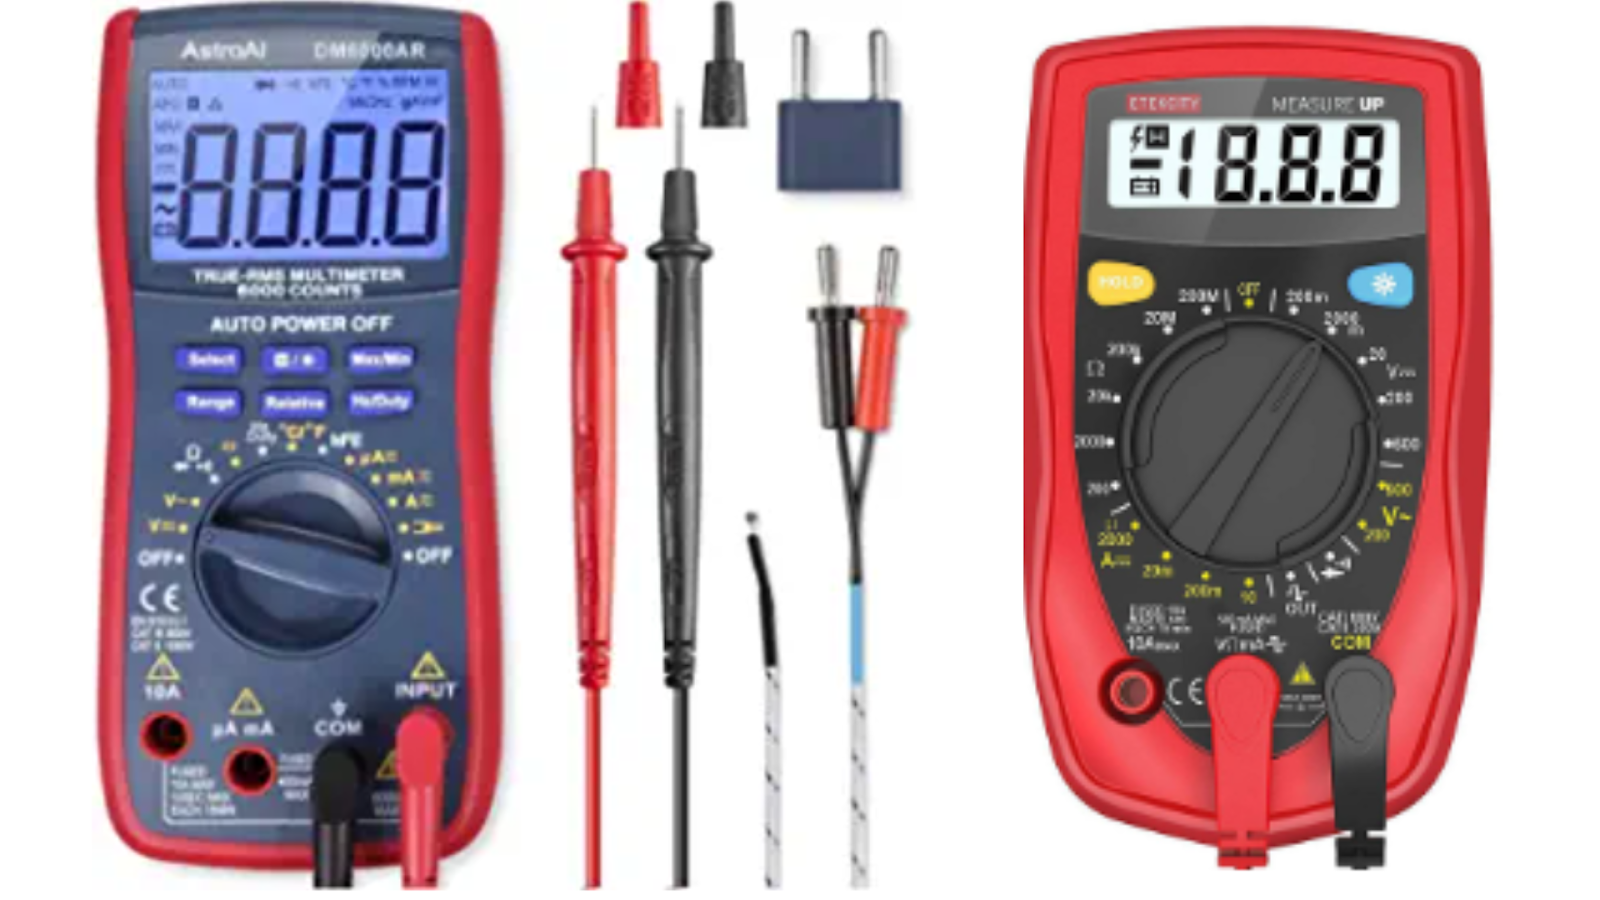 How to Use the Digital Multimeter